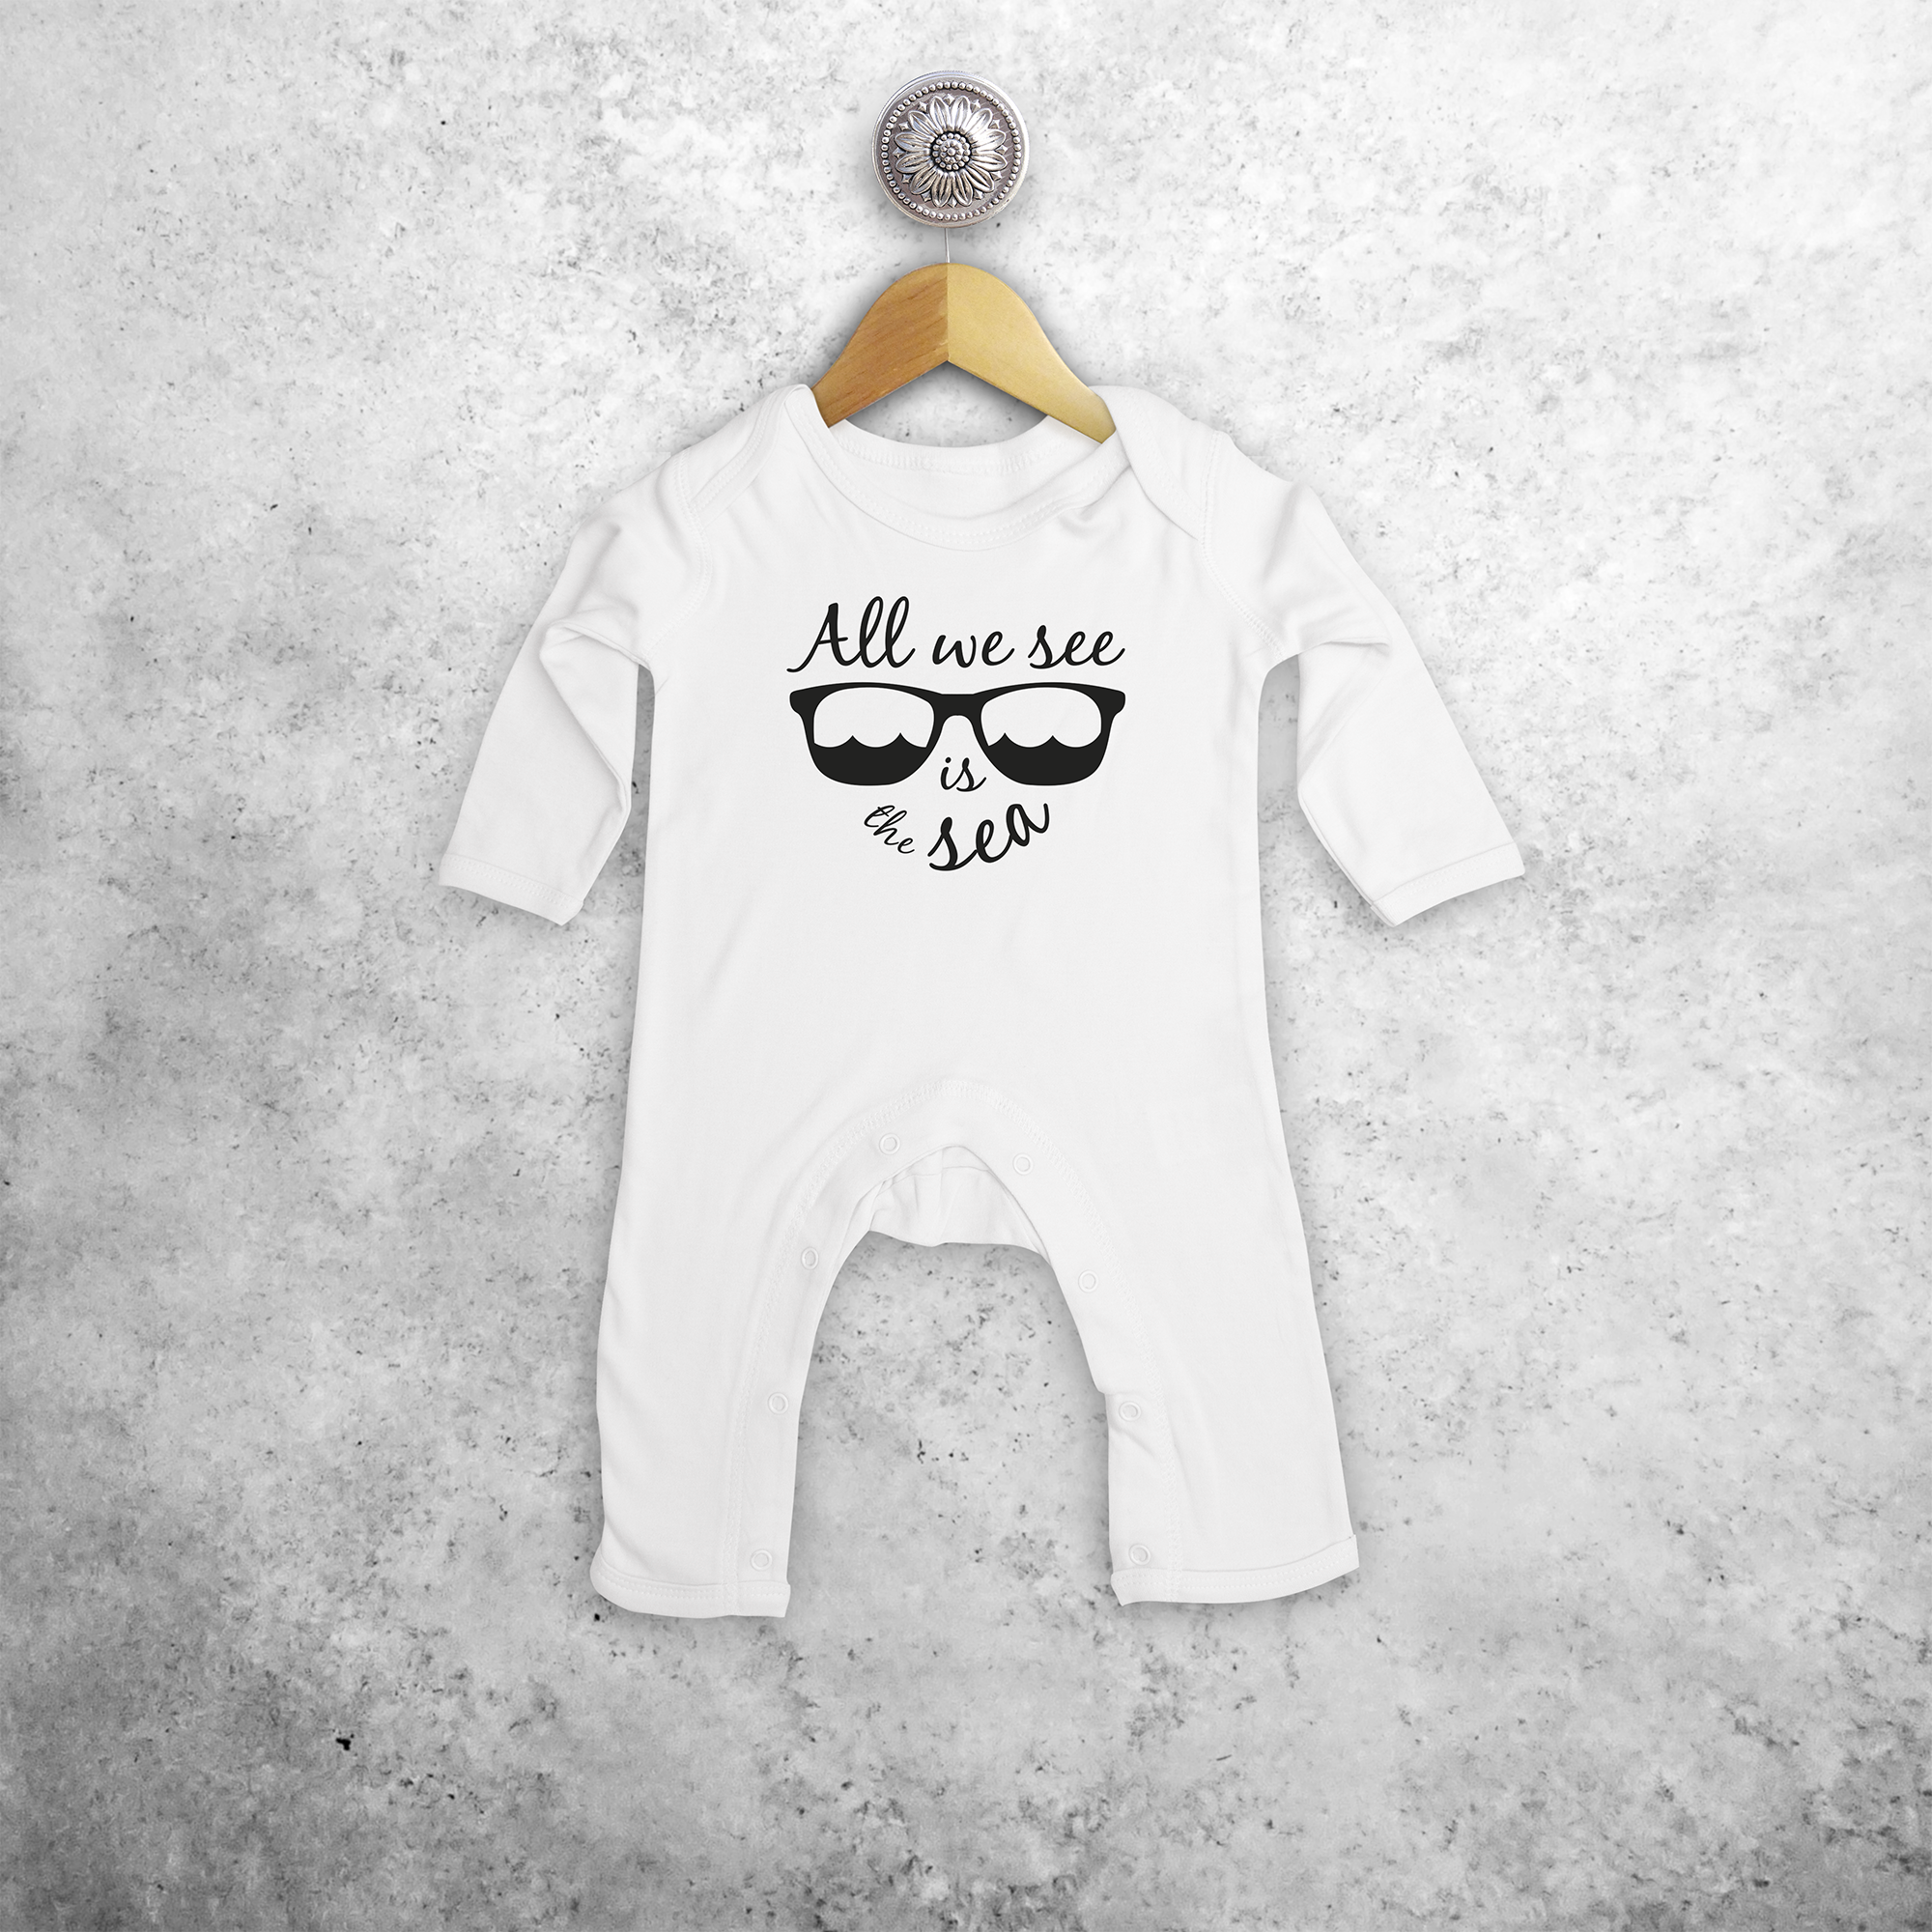 'All we see is the sea' baby romper